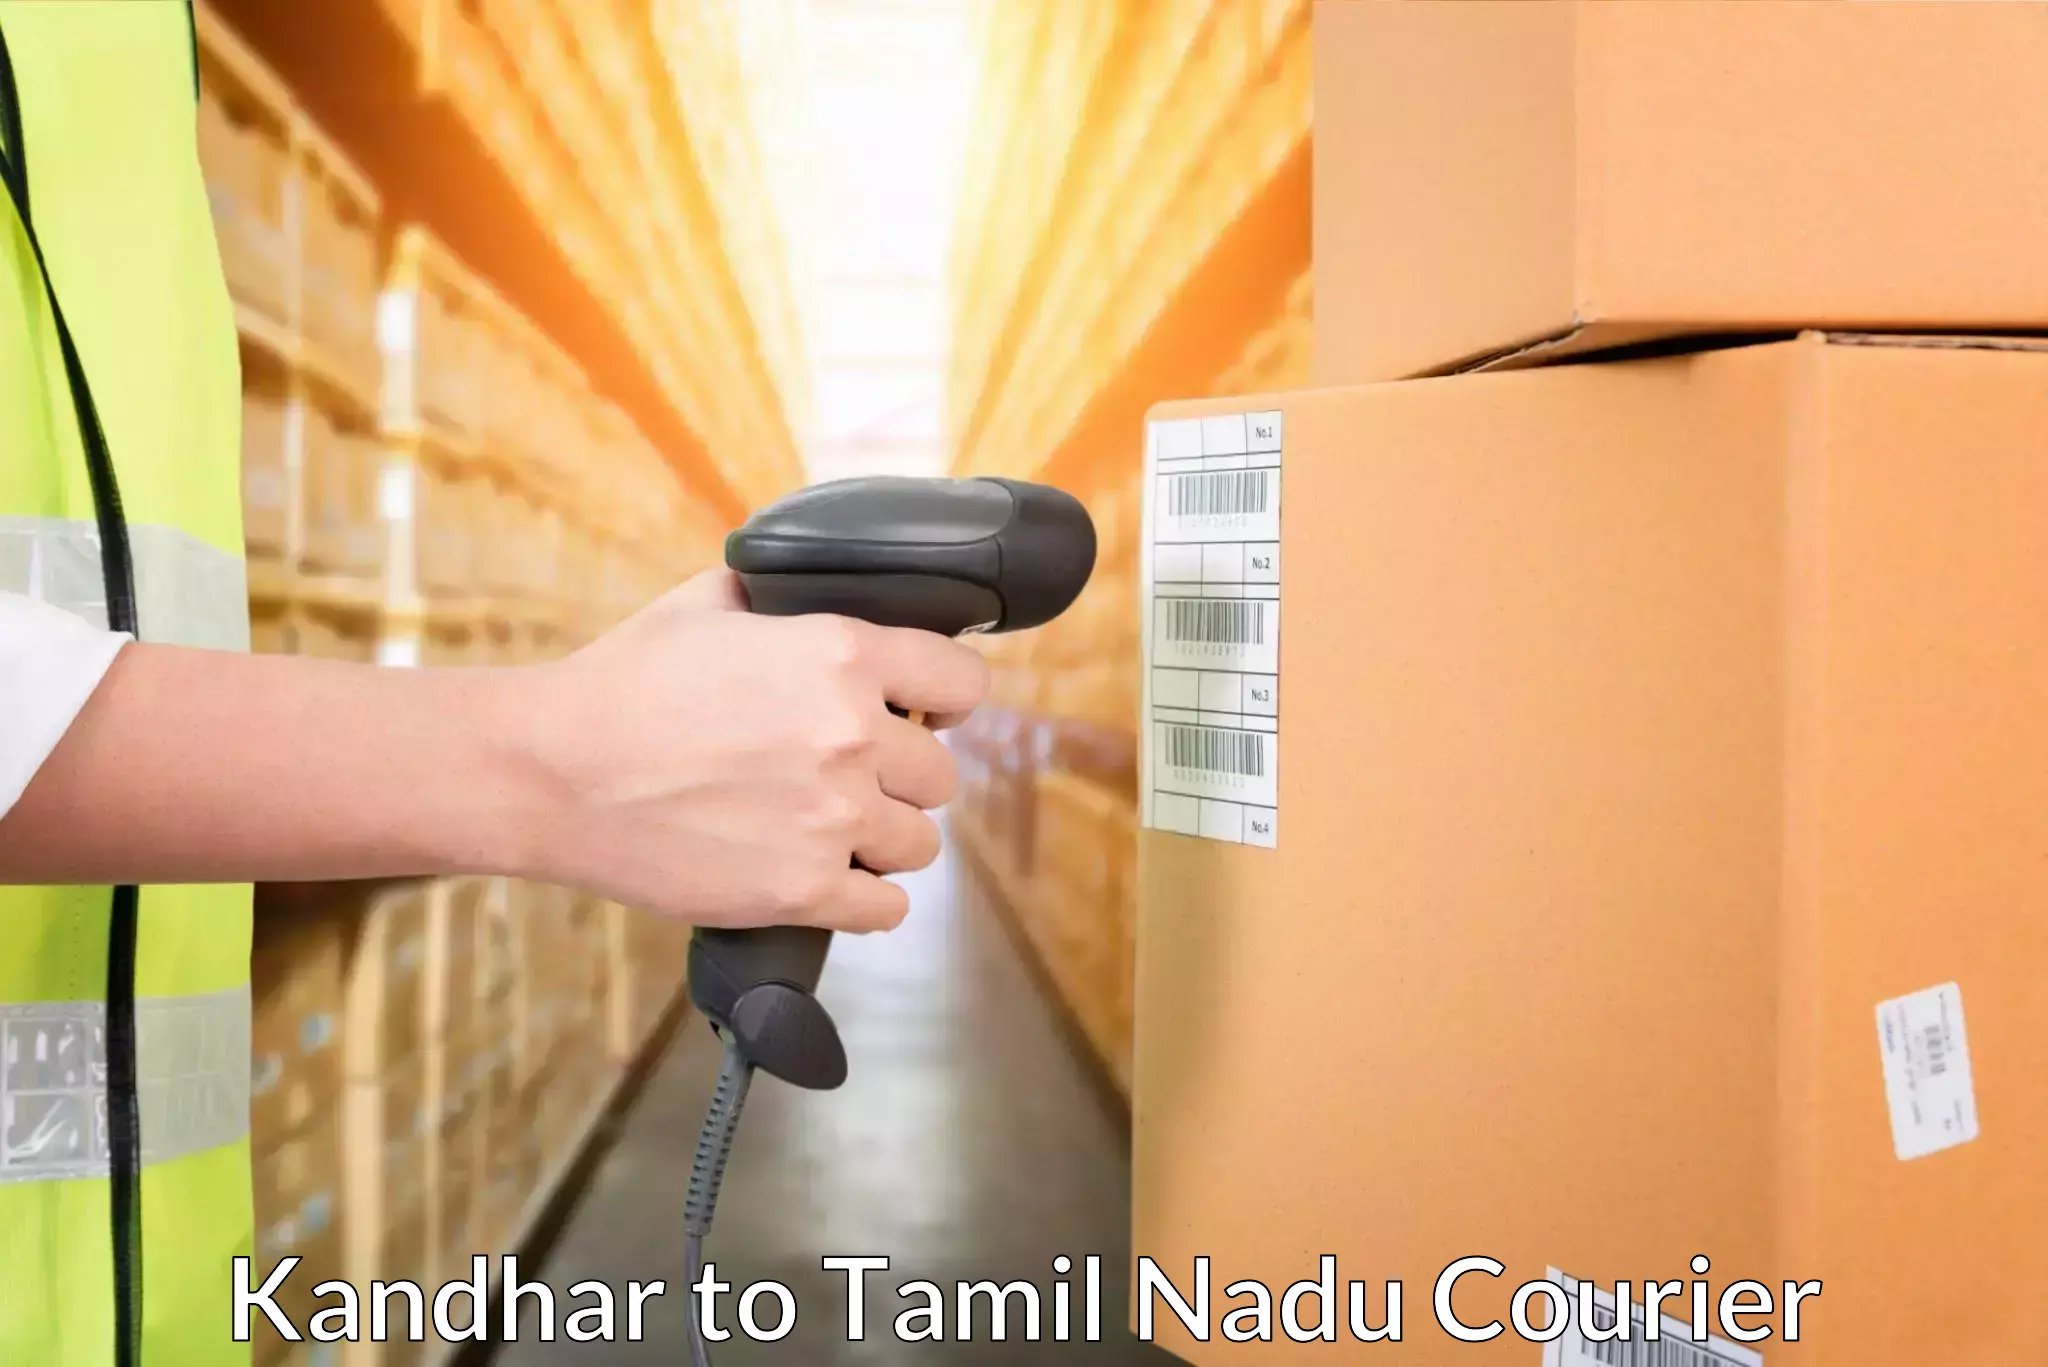 Automated parcel services Kandhar to Vriddhachalam